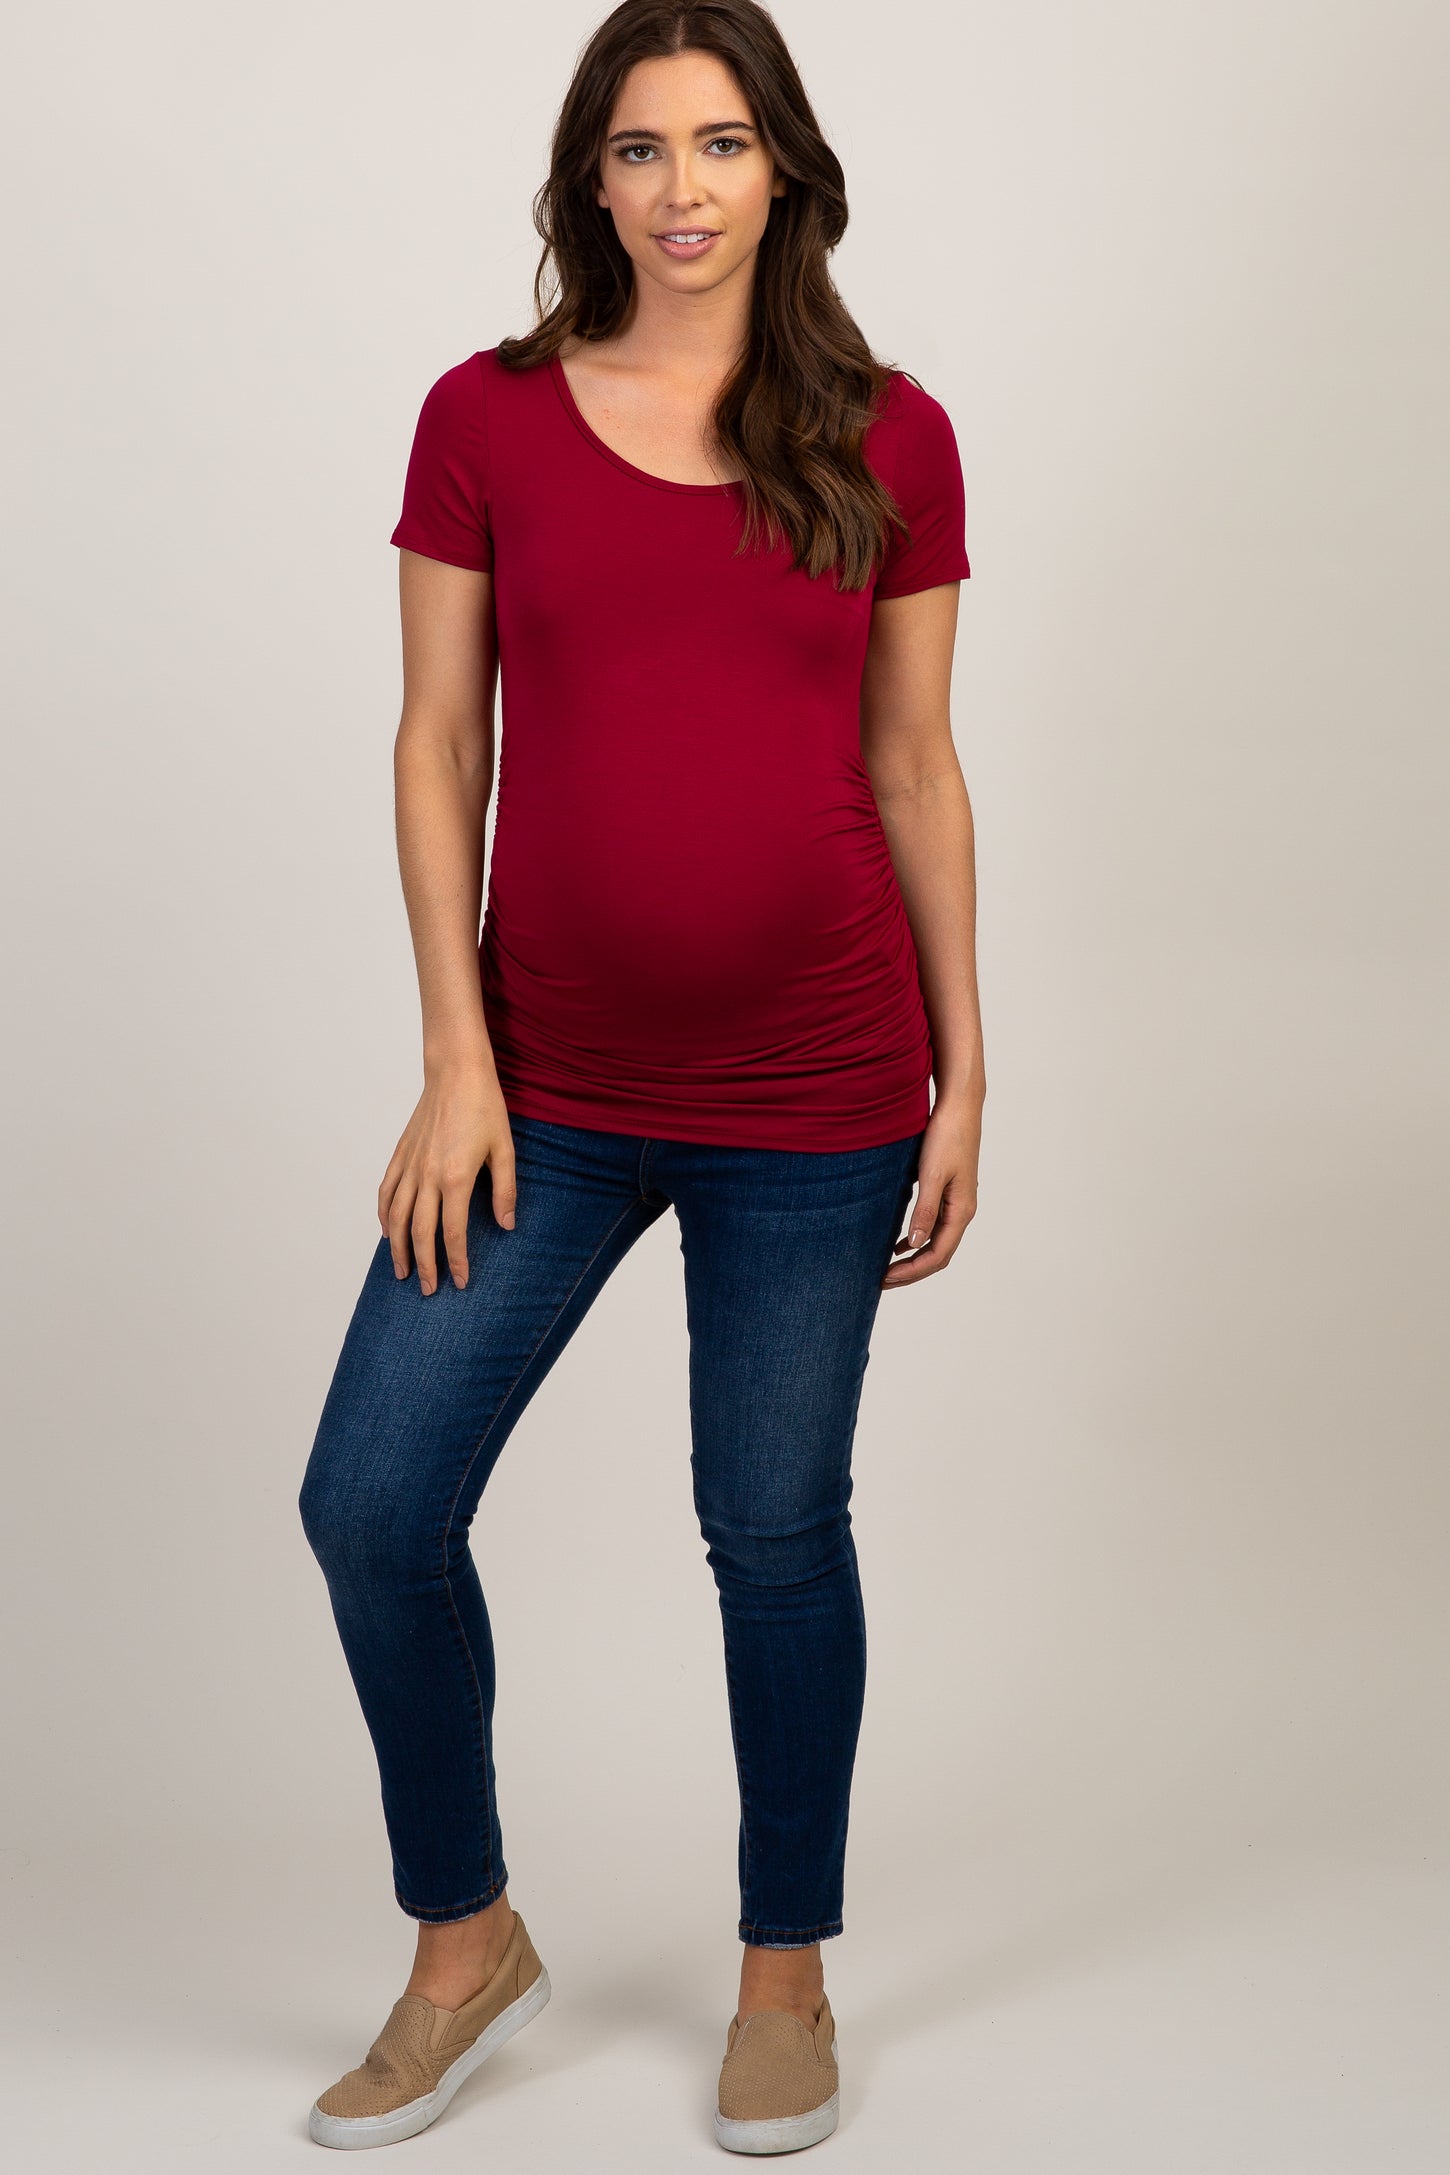 PinkBlush Burgundy Ruched Short Sleeve Maternity Top